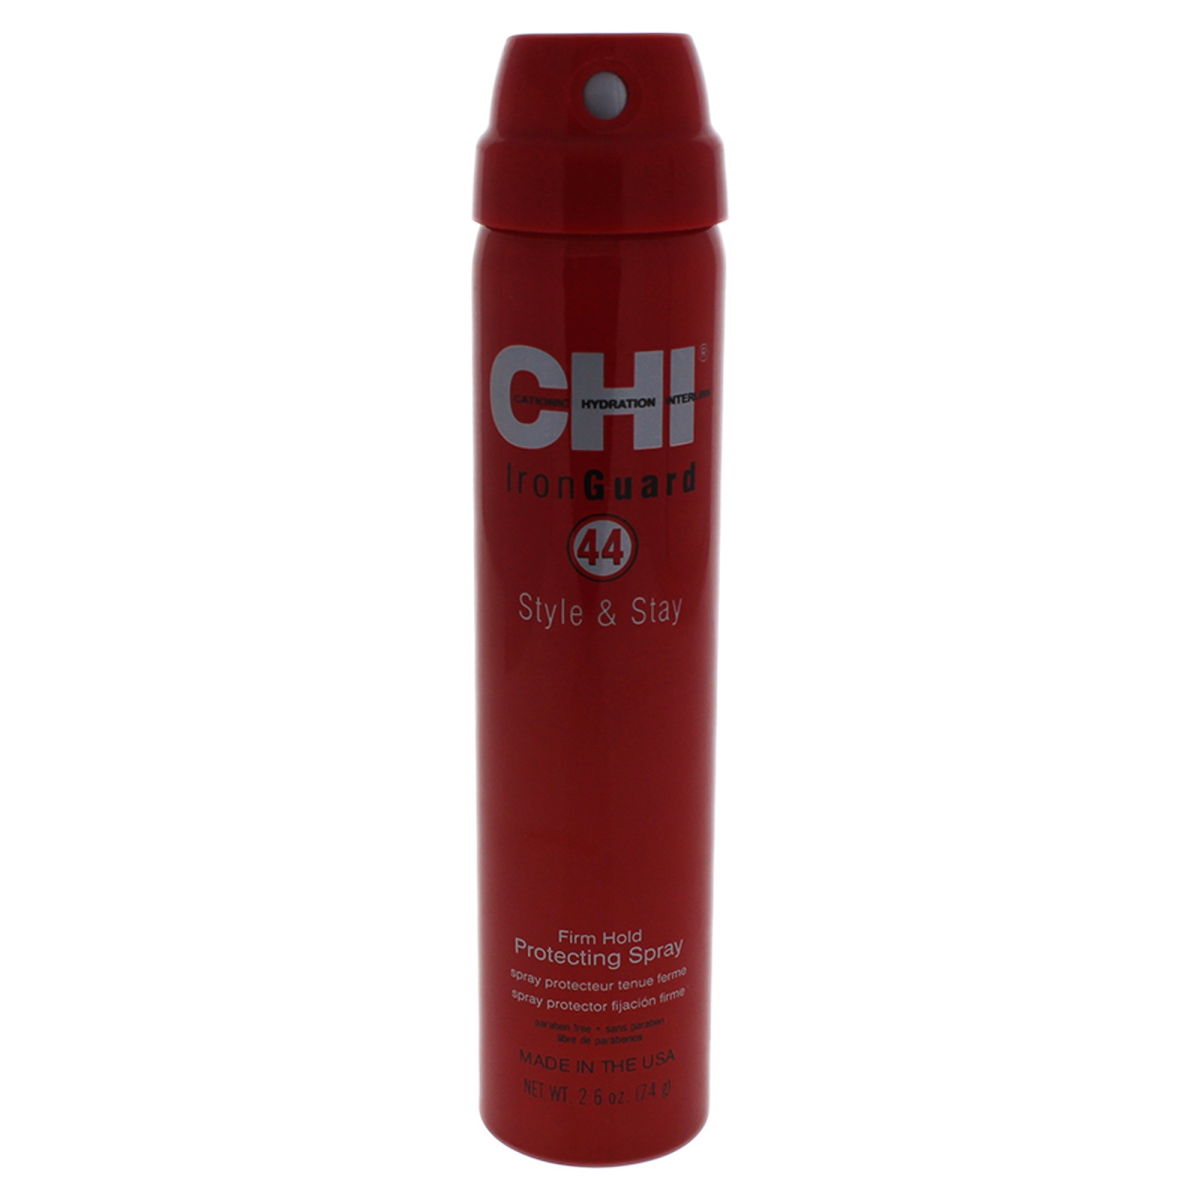 Picture of CHI U-HC-11049 2.6 oz Unisex 44 Iron Guard Style & Stay Firm Hold Protecting Hair Spray